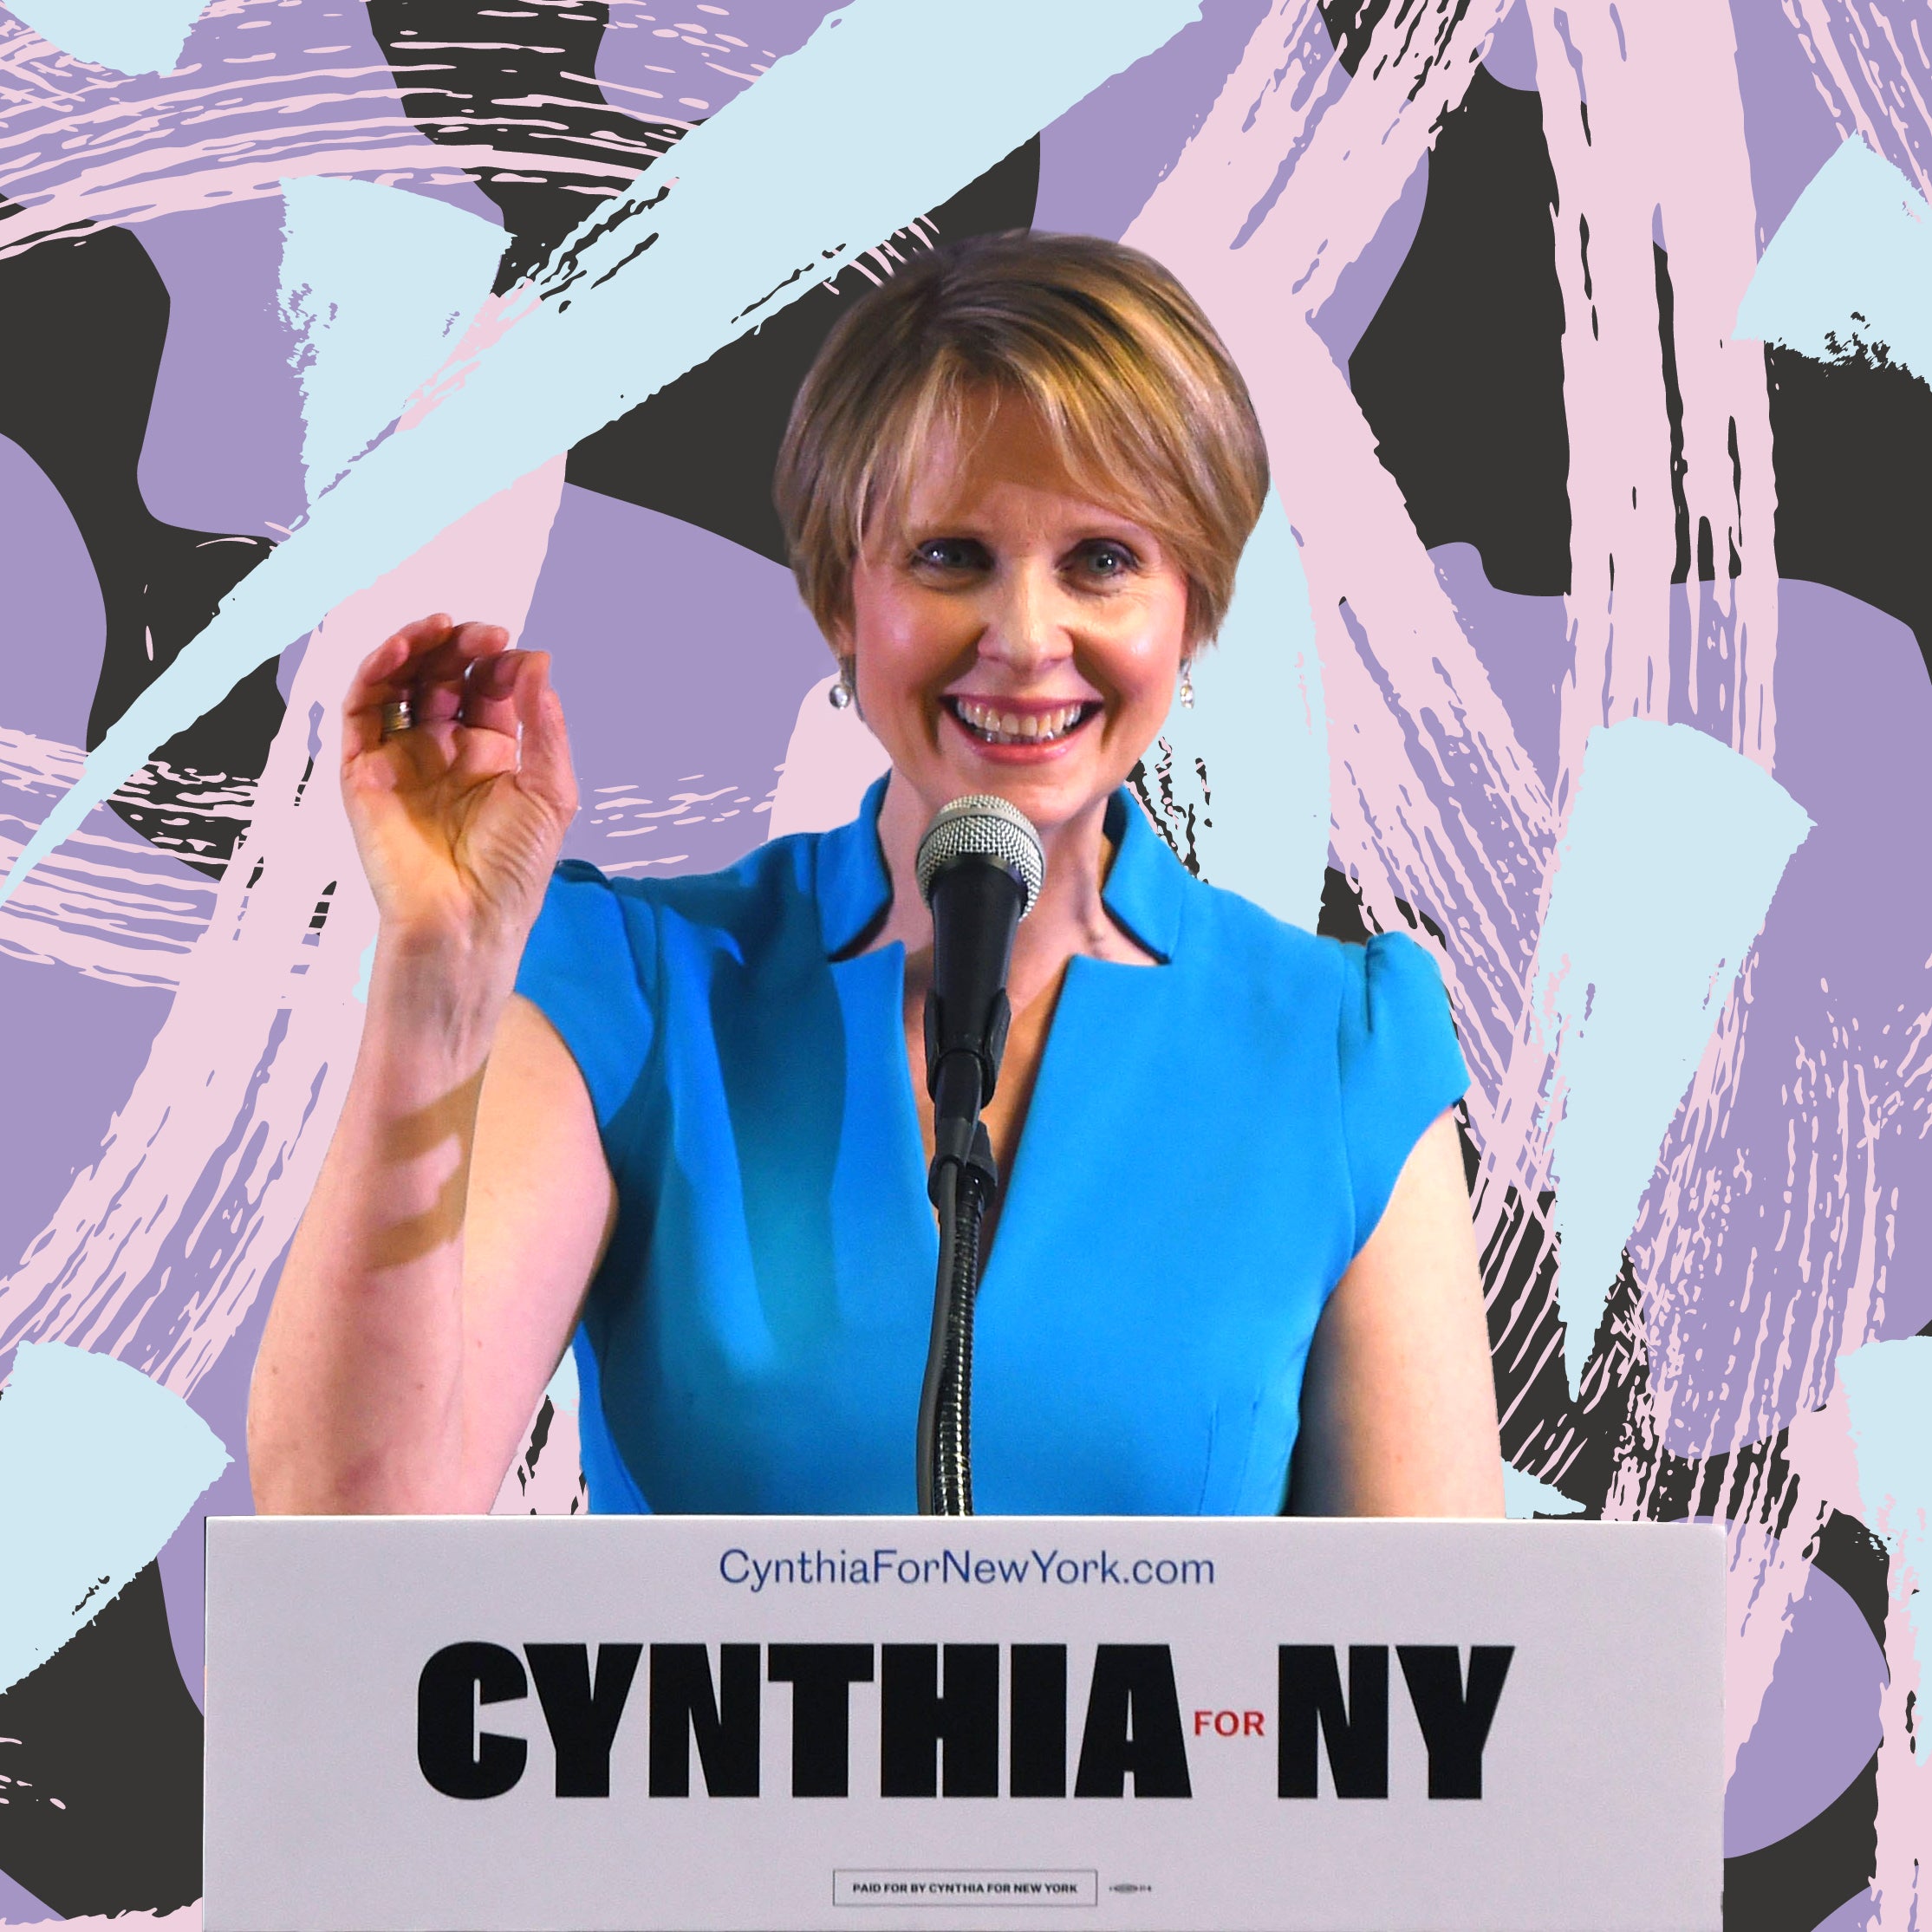 OP-ED: Cynthia Nixon's Political Run Should Be Taken Seriously Because She Takes Black Voters Seriously
